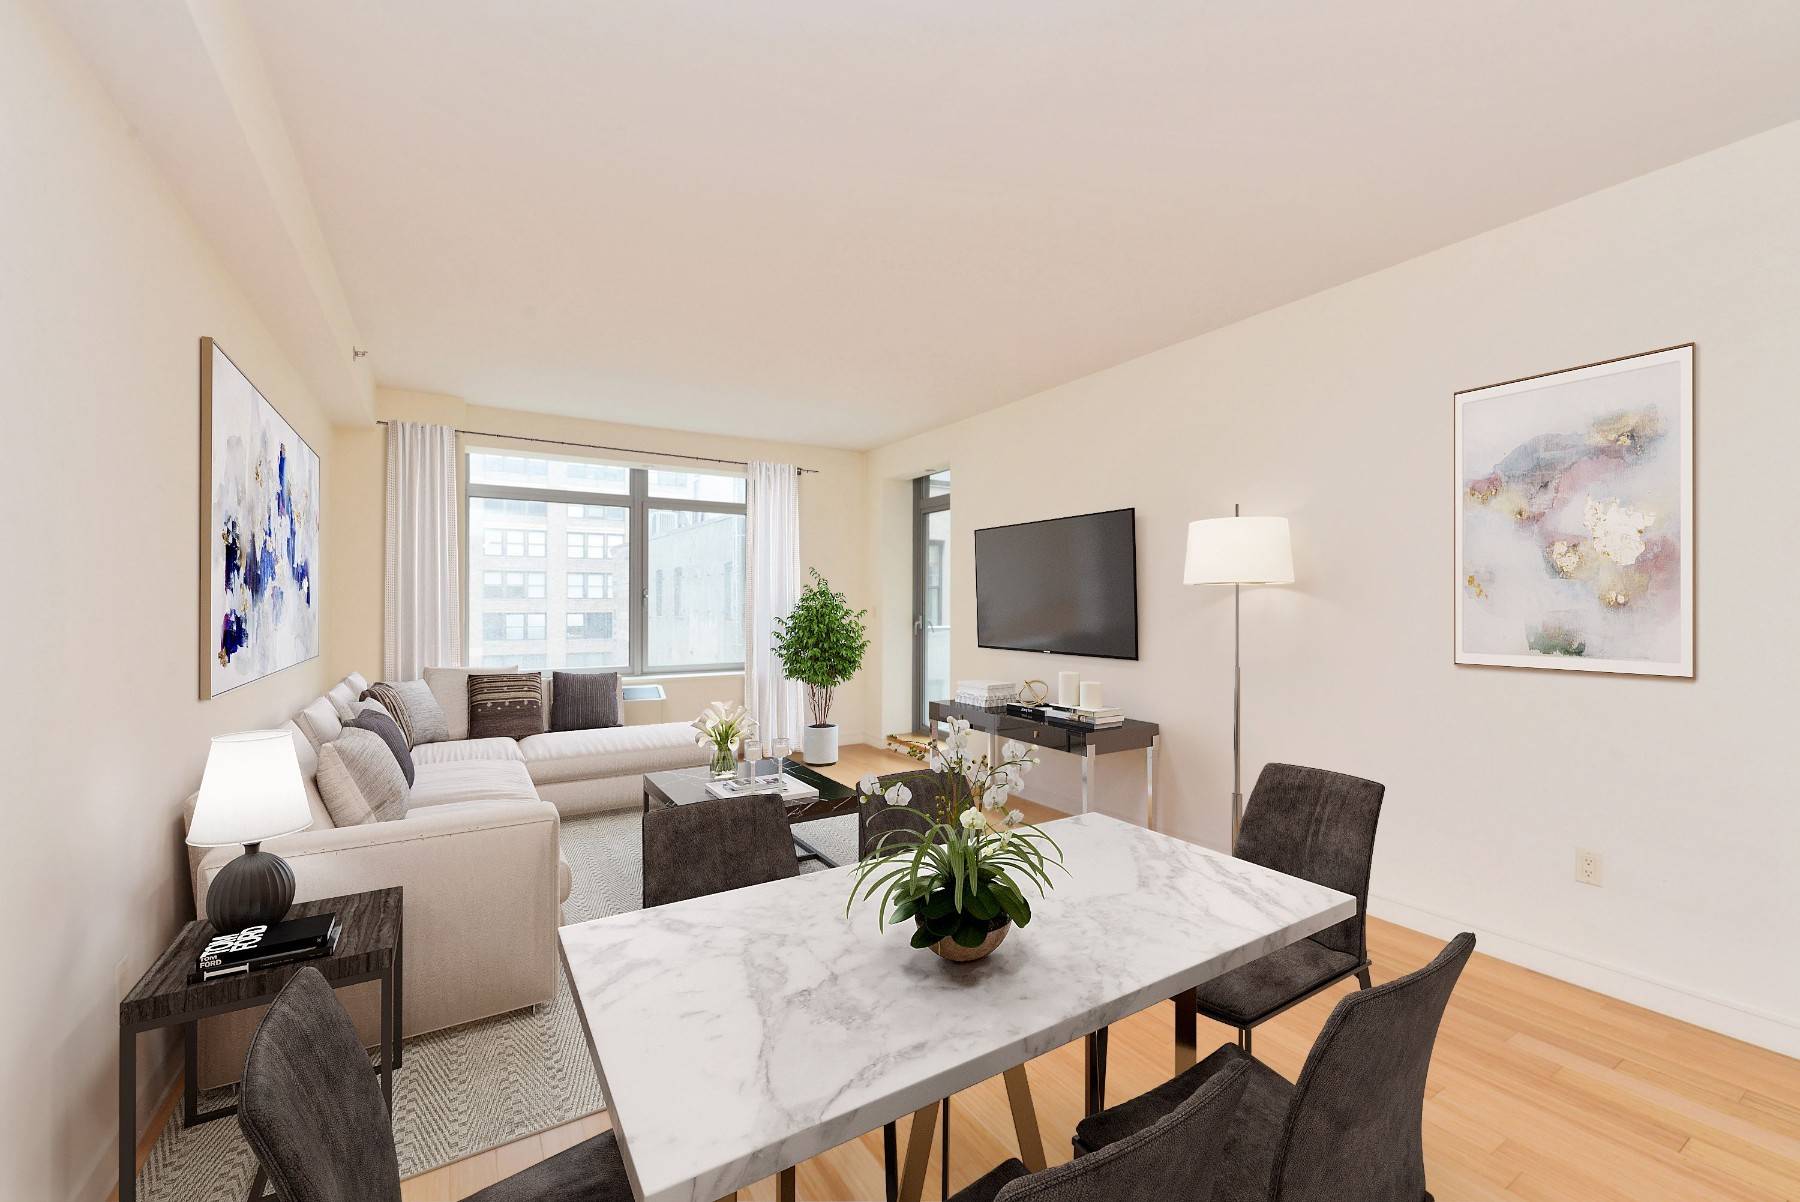 Pristine, sun filled convertible 2 bedroom unit conveniently located in an upscale, newly developed condo building in the heart of Kips Bay in Manhattan within close proximity to major transportation, ...